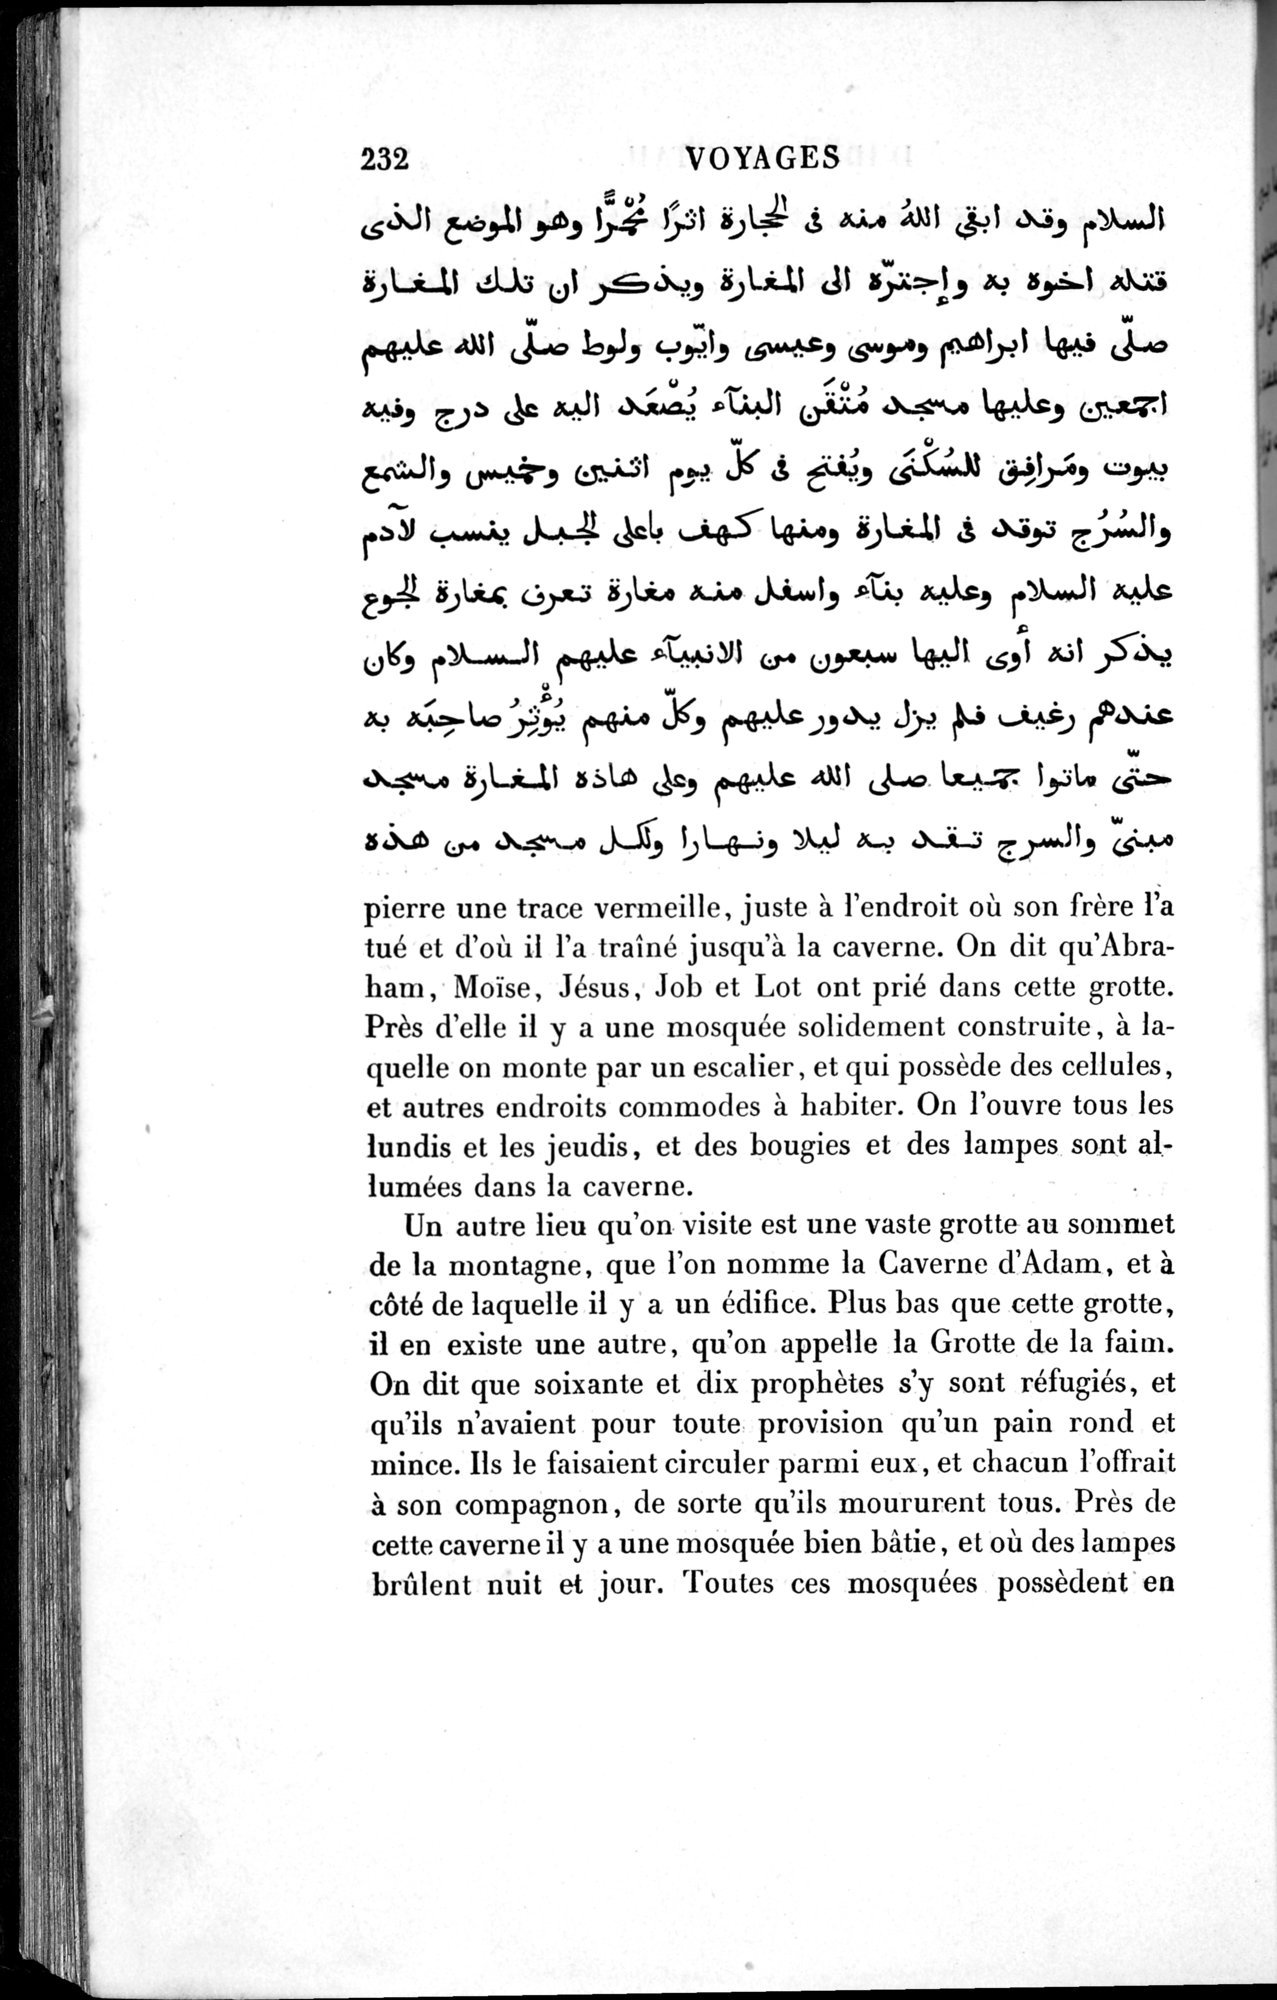 Voyages d'Ibn Batoutah : vol.1 / Page 292 (Grayscale High Resolution Image)